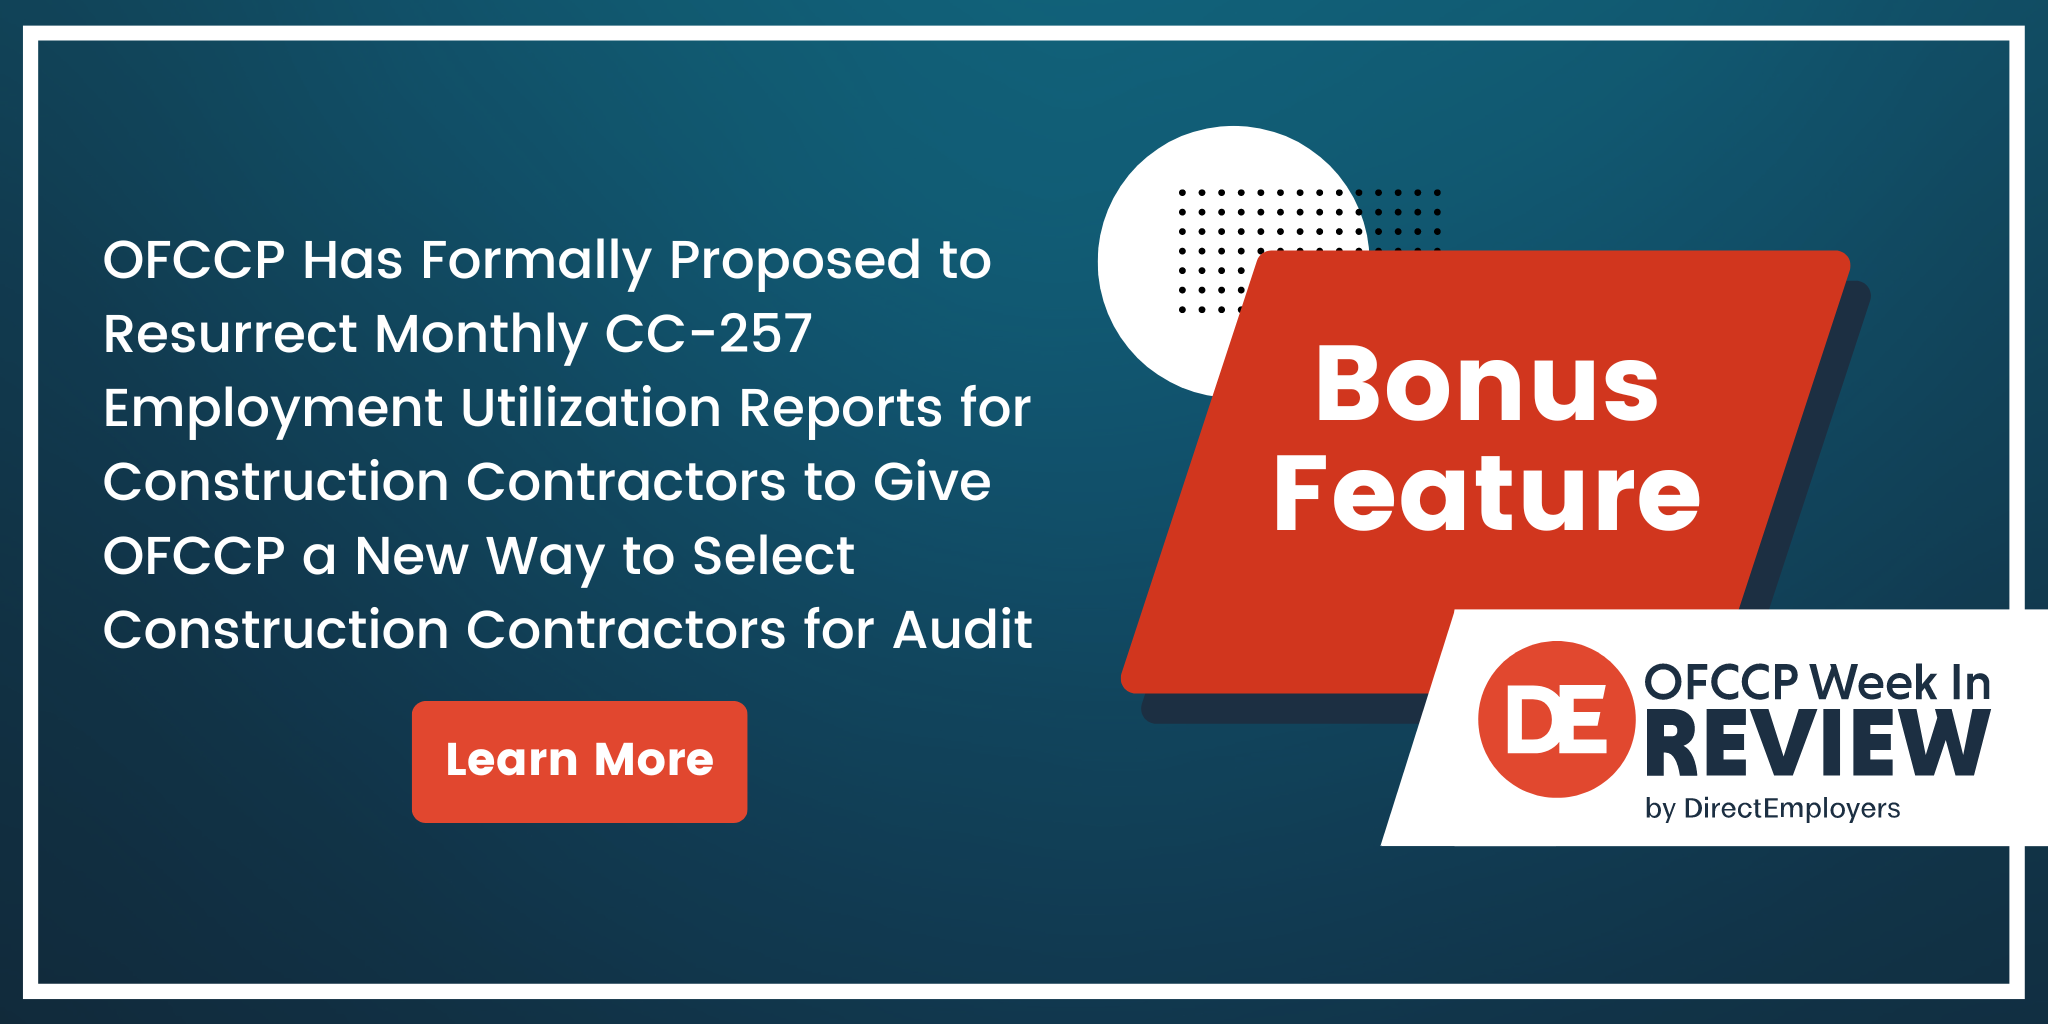 OFCCP Week In Review Bonus Feature | OFCCP Has Formally Proposed to Resurrect Monthly CC-257 Employment Utilization Reports for Construction Contractors to Give OFCCP a New Way to Select Construction Contractors for Audit